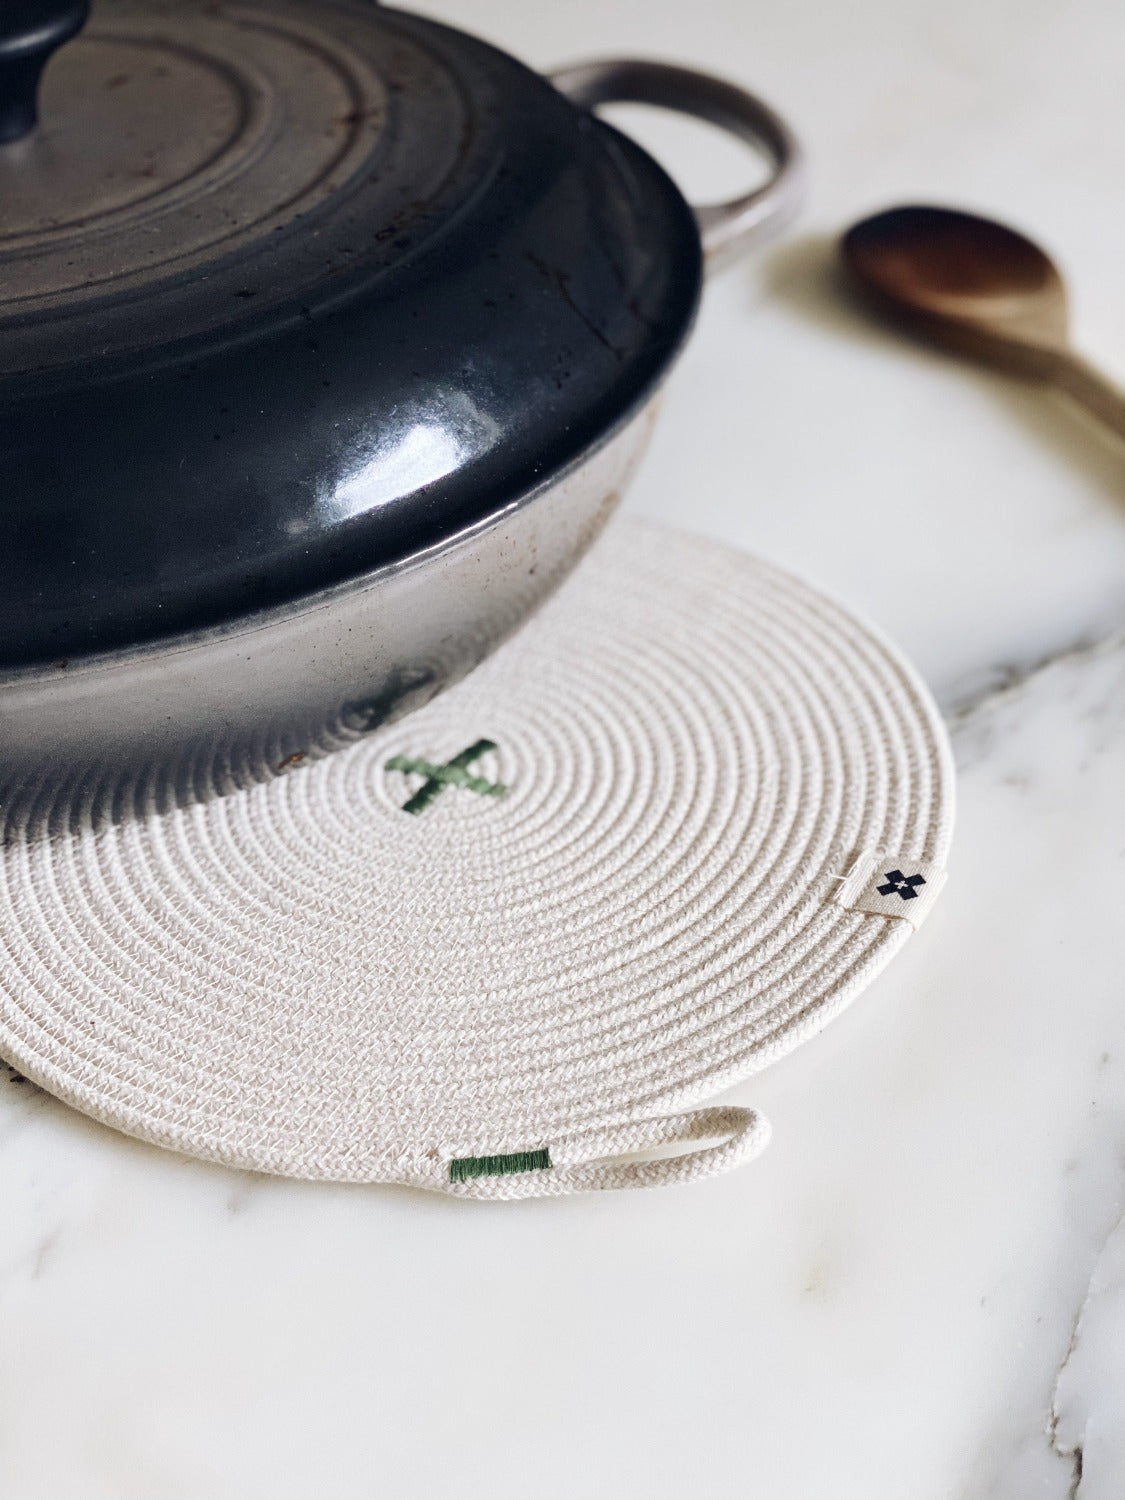 Flat lay image of Large Rope Trivet Sage. The white rope trivet is laying on a white marble surface. There is a black pan with a black lid on the edge of the trivet. There is a wooden spoon lying next to the trivet and pan. 